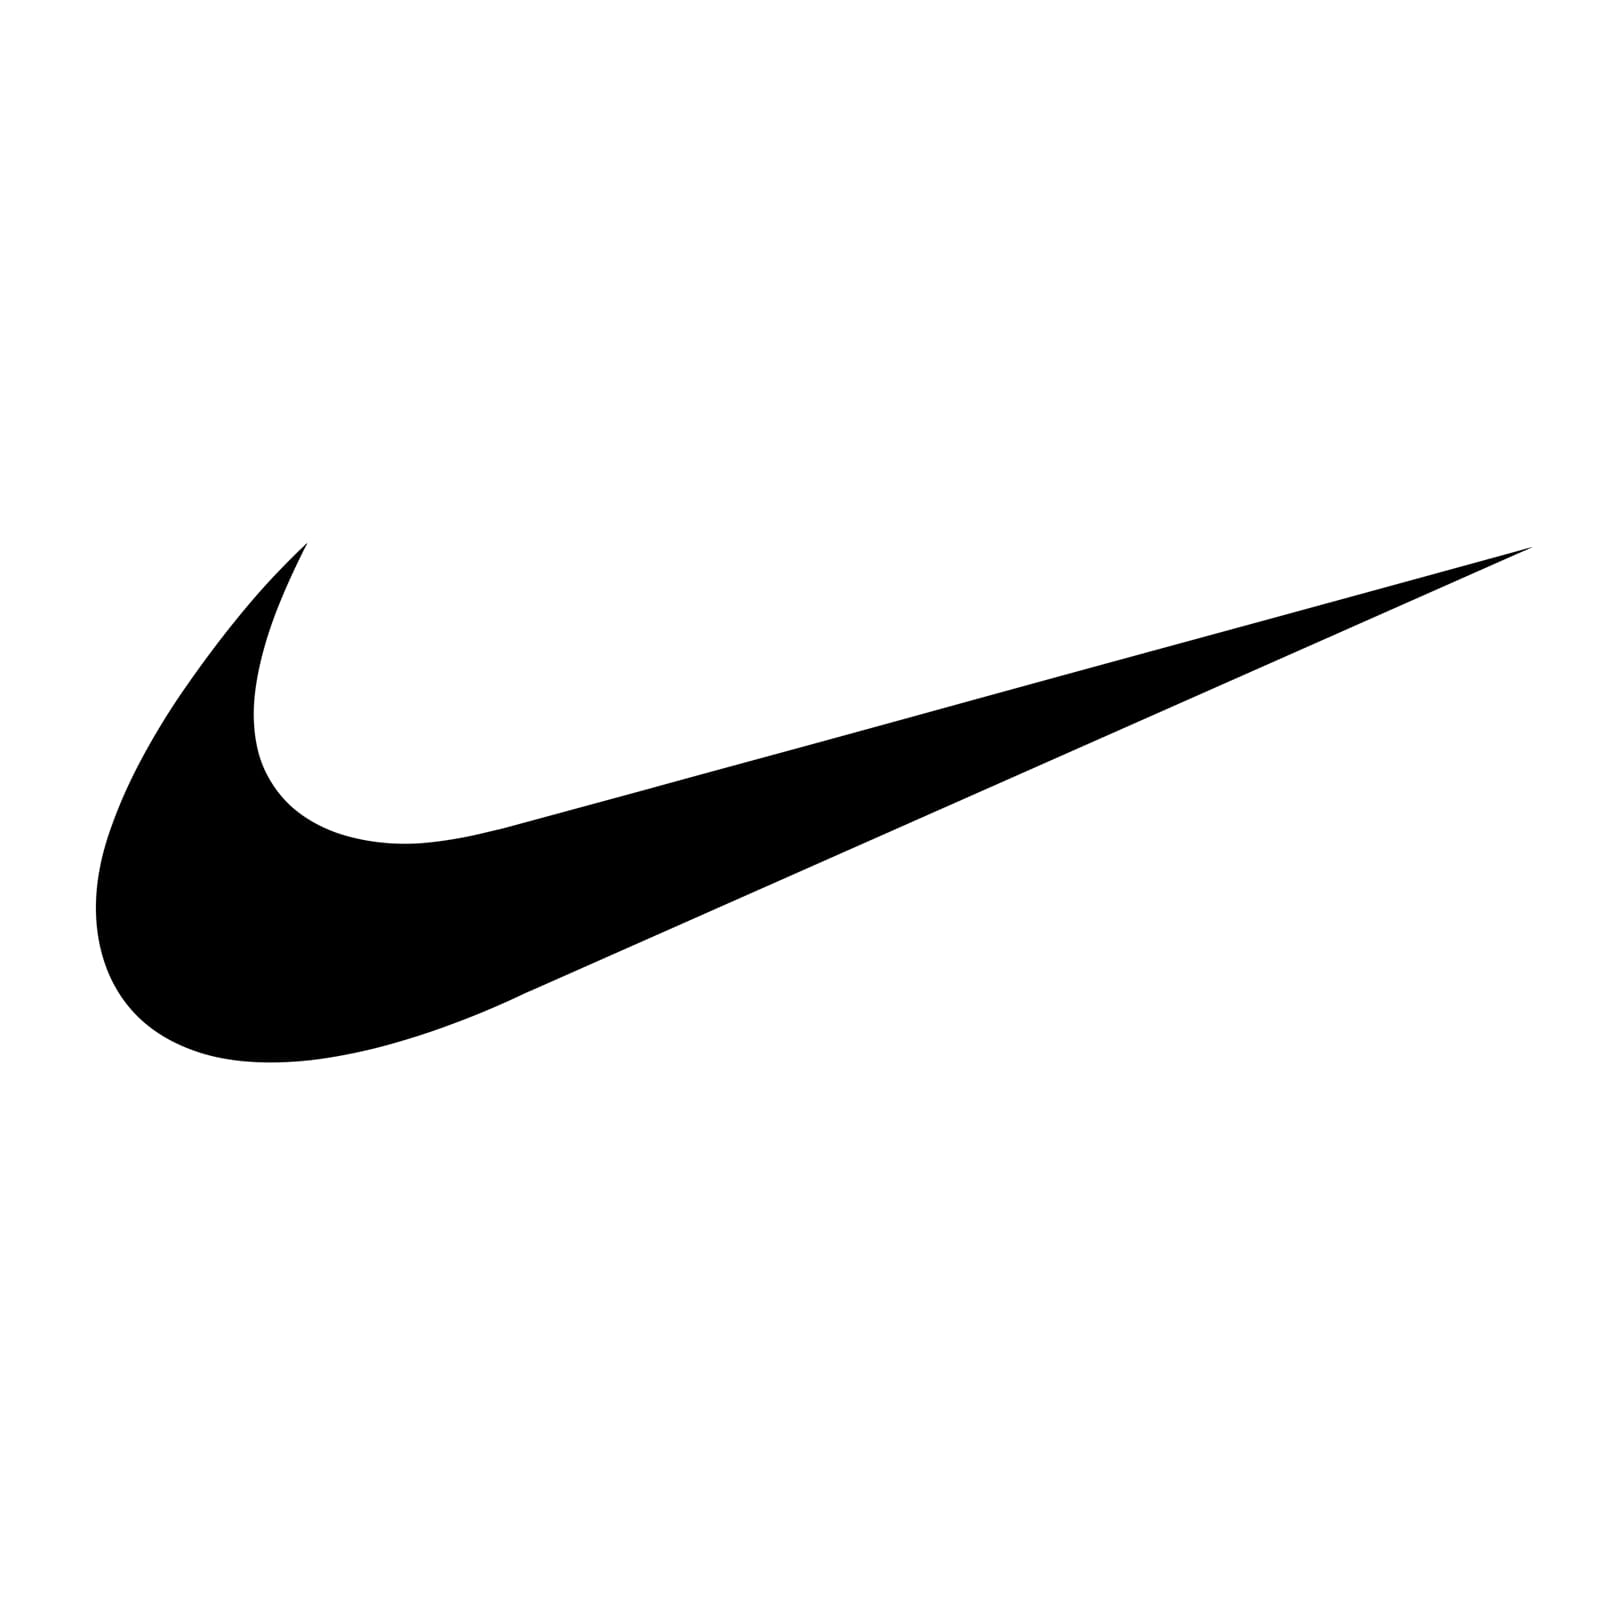 Trademark companies like Nike have legally protected names and logos, so we can't put them on custom t shirts